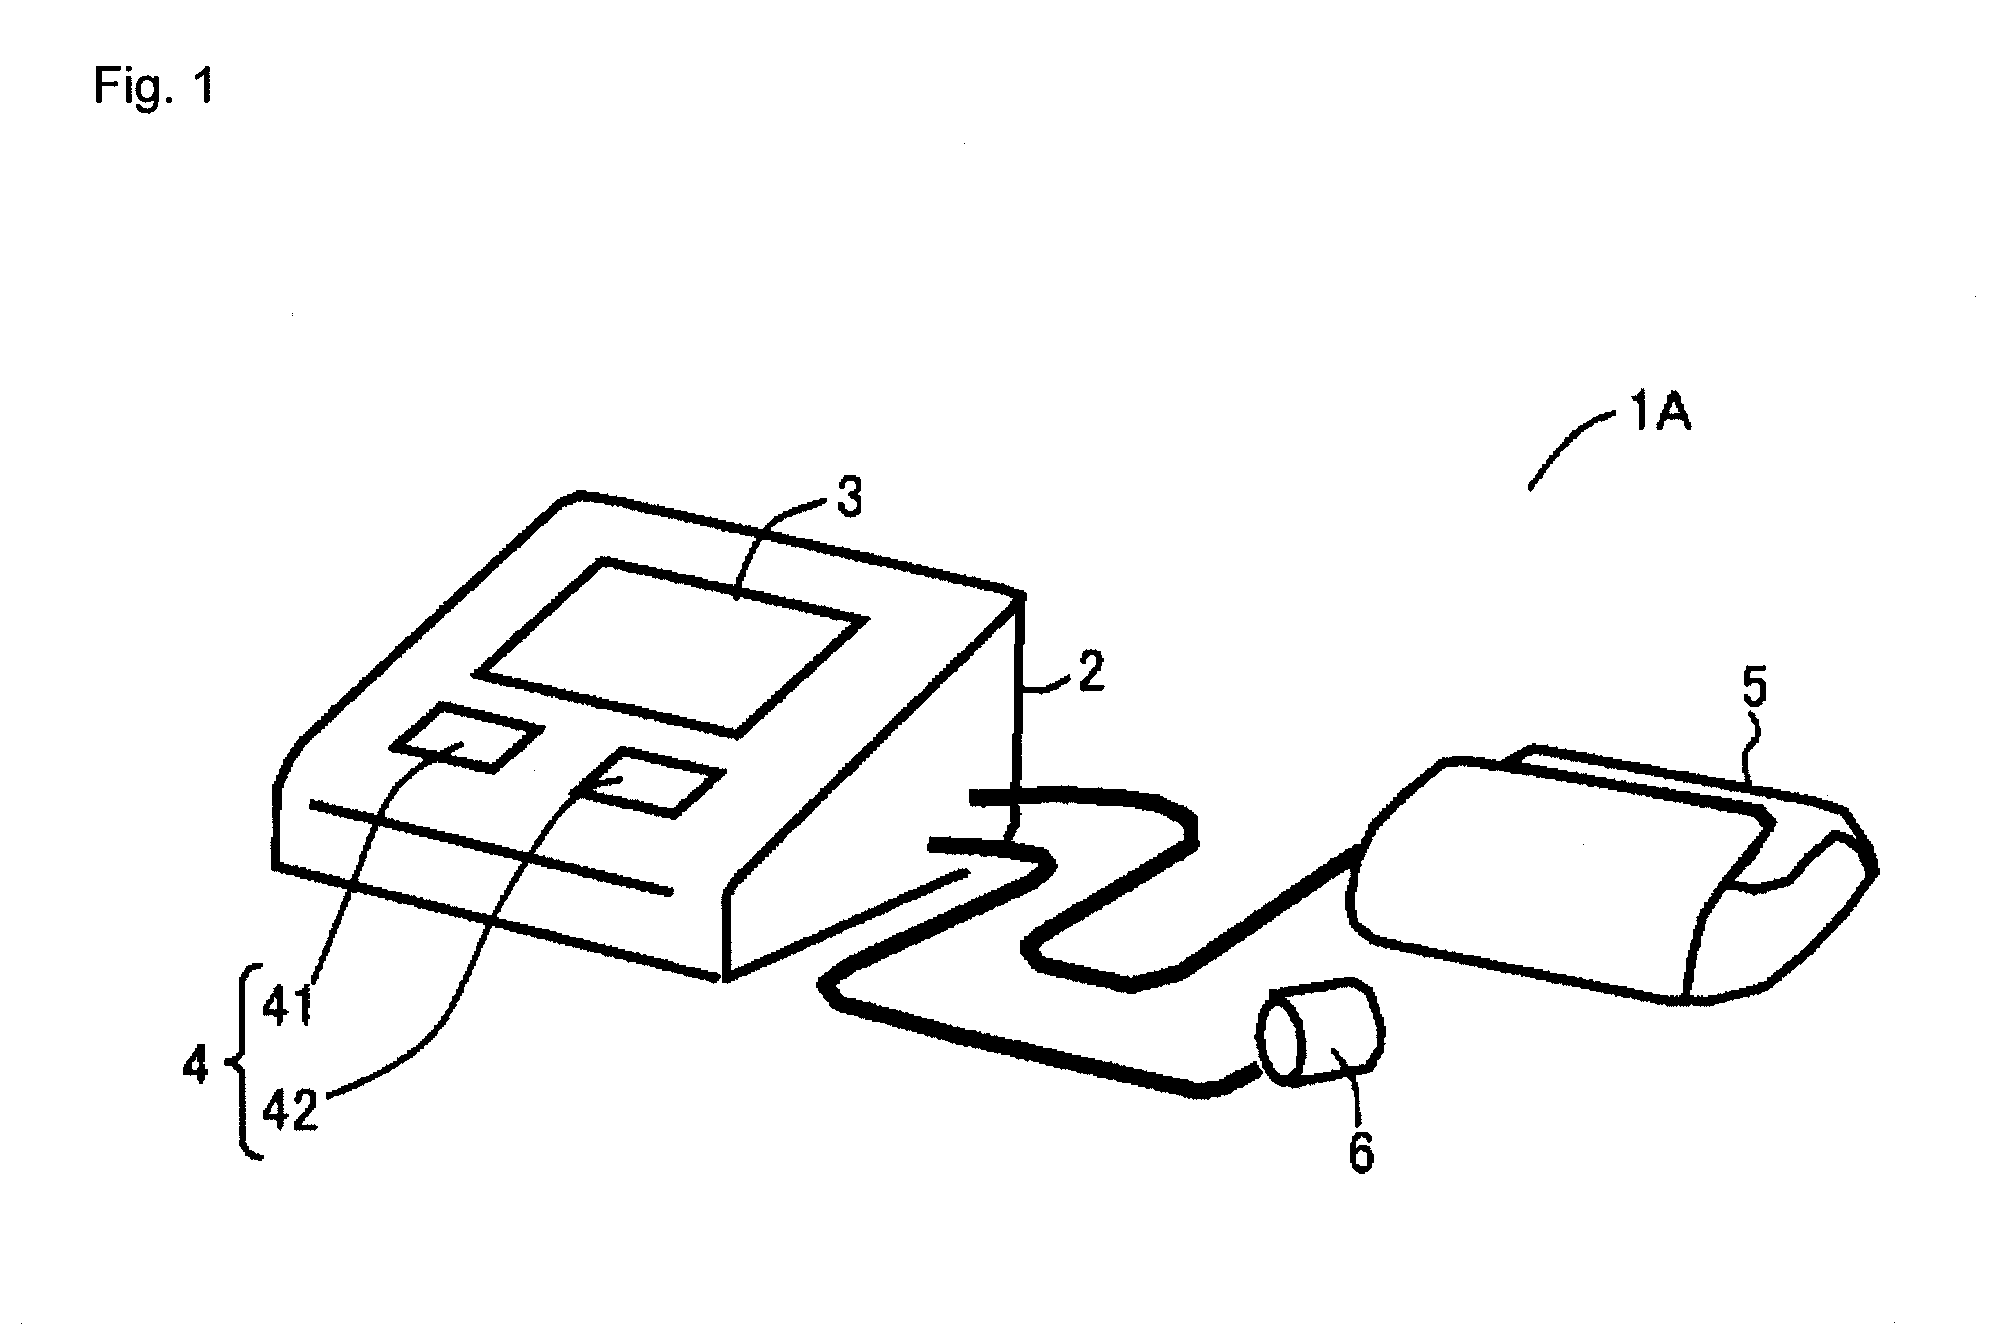 Blood pressure measurement device for measuring at appropriate timing